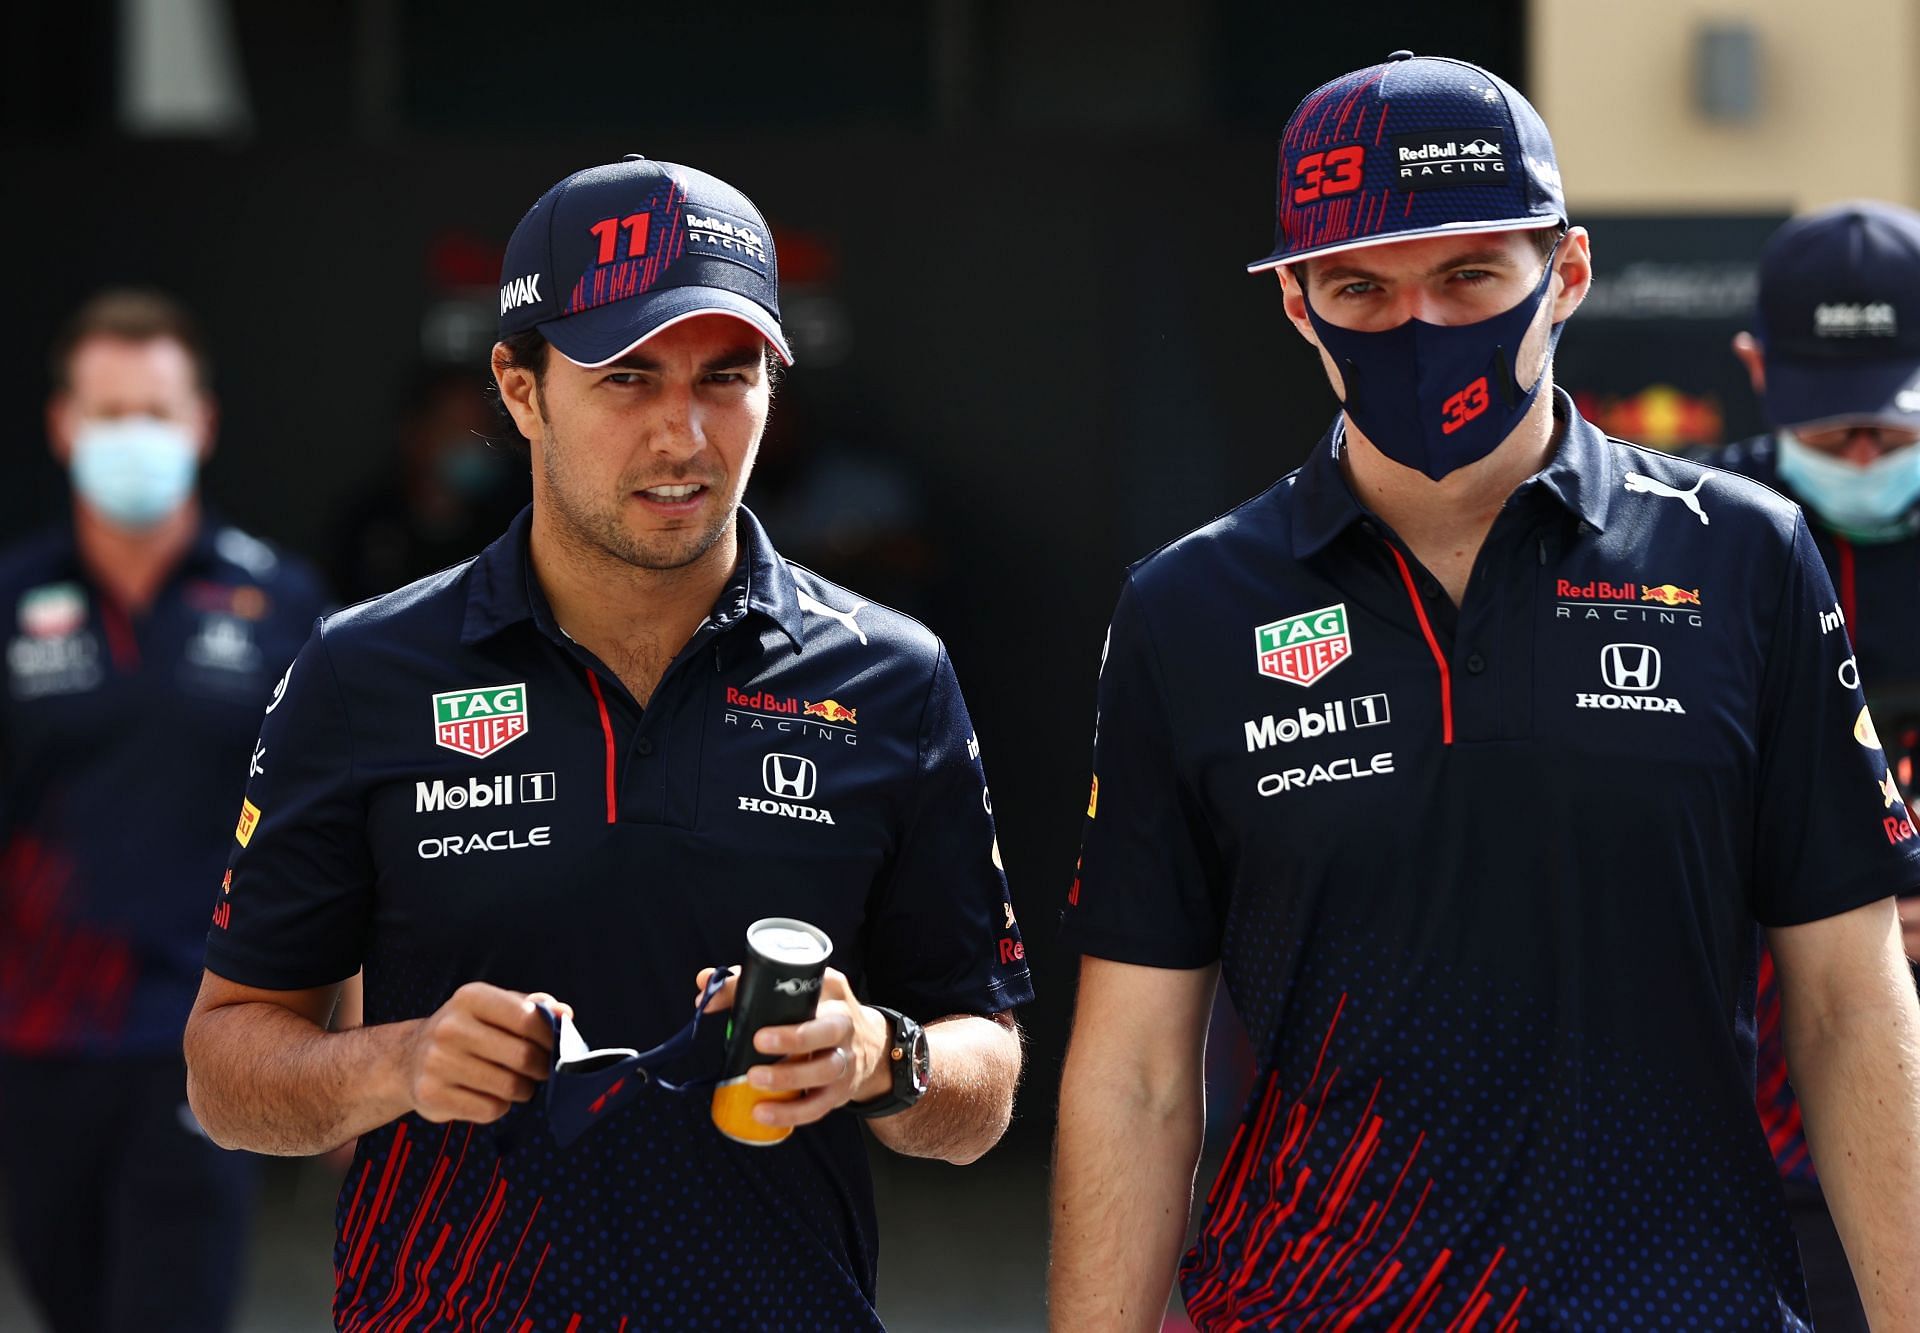 Sergio Perez (left) and Max Verstappen (right) arriving at the paddock at the 2021 Abu Dhabi